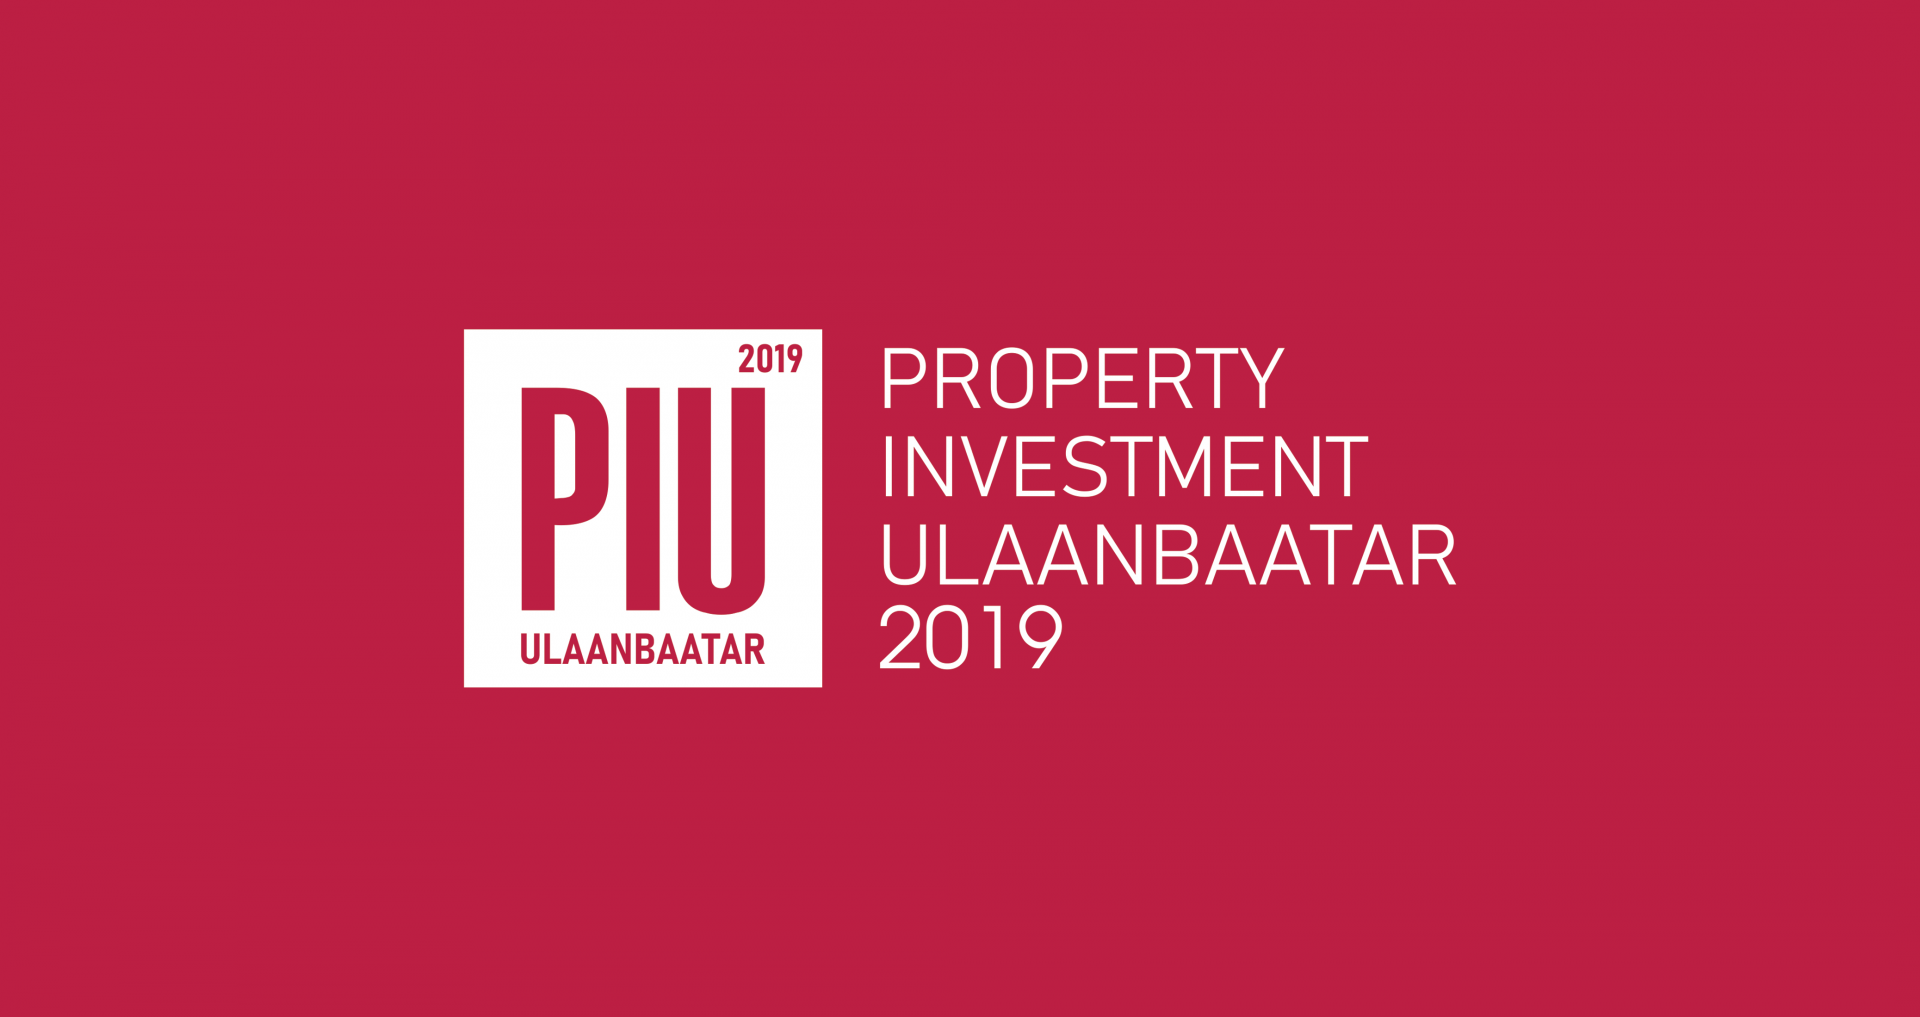 PROPERTY INVESTMENT ULAANBAATAR 2019 GATHERS OVER 1000 ATTENDEES